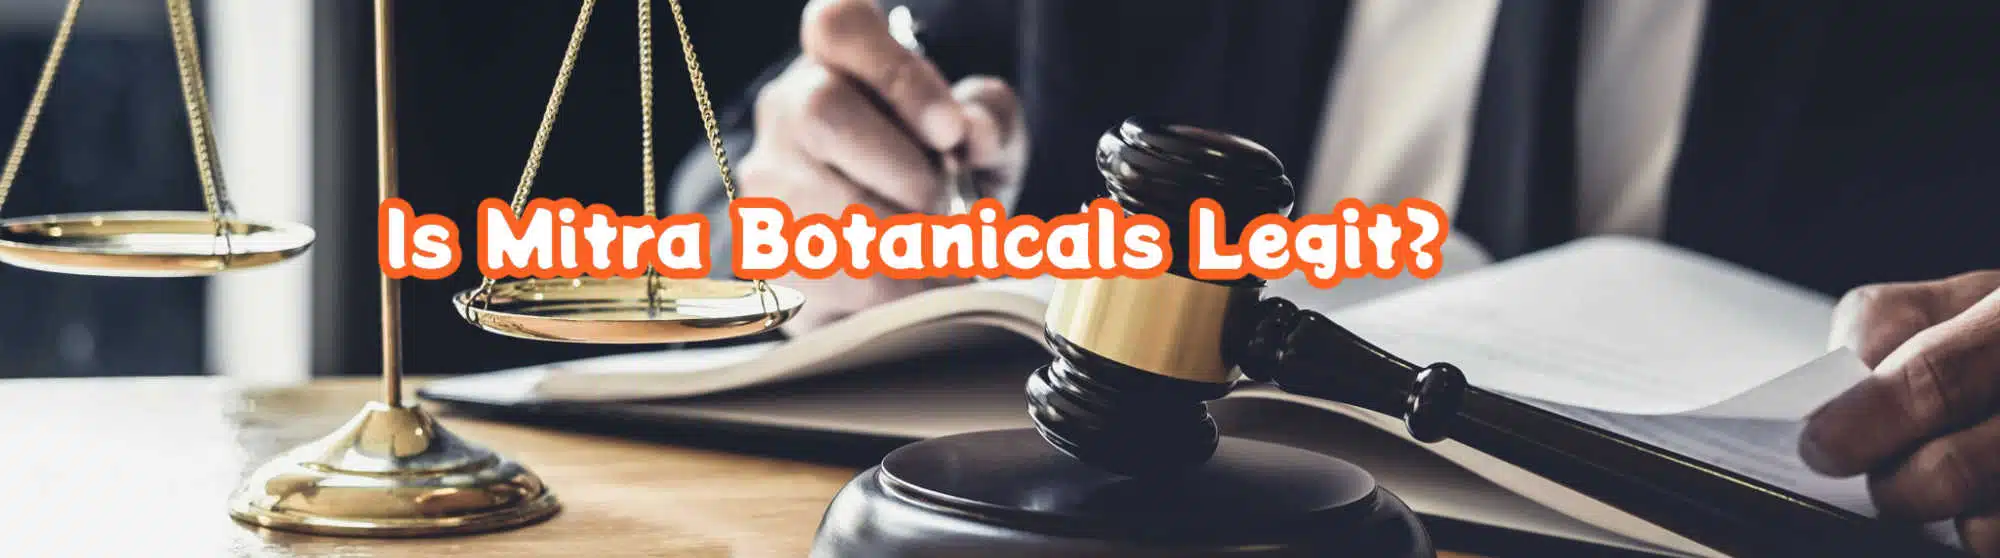 "Is mitra botanicals legit" banner with gavel and scales of justice